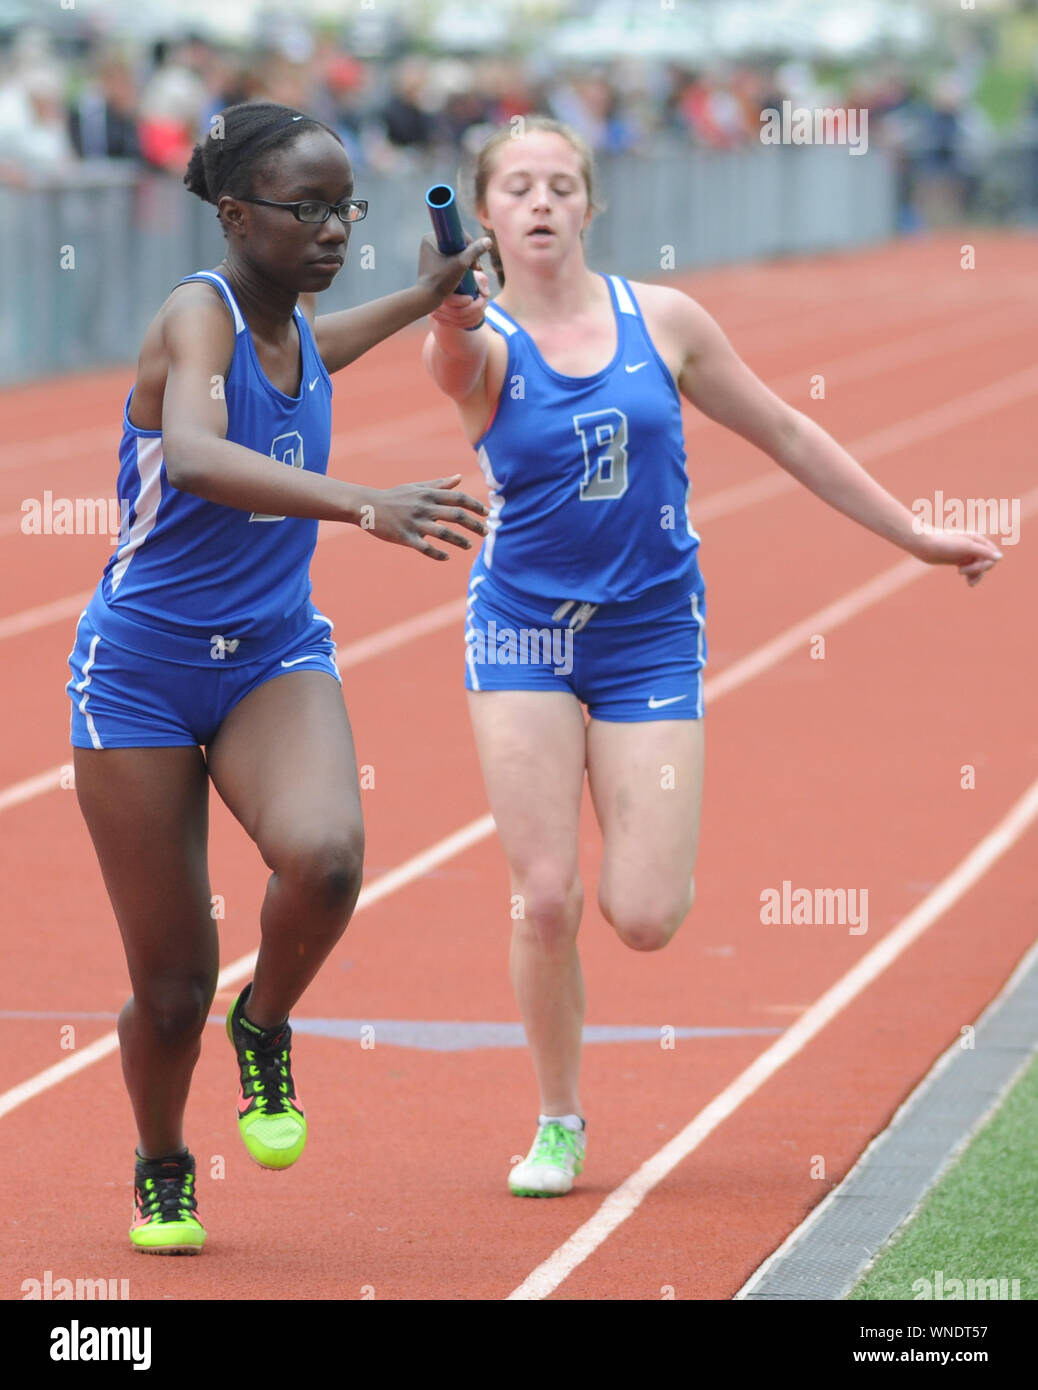 Bensalem's Joy Senkungo (left) and Tori Reid compete in the 4 x 100 relay during the Jim Kelly Invitational Saturday April 15, 2017 in Horsham, Pennsy Stock Photo